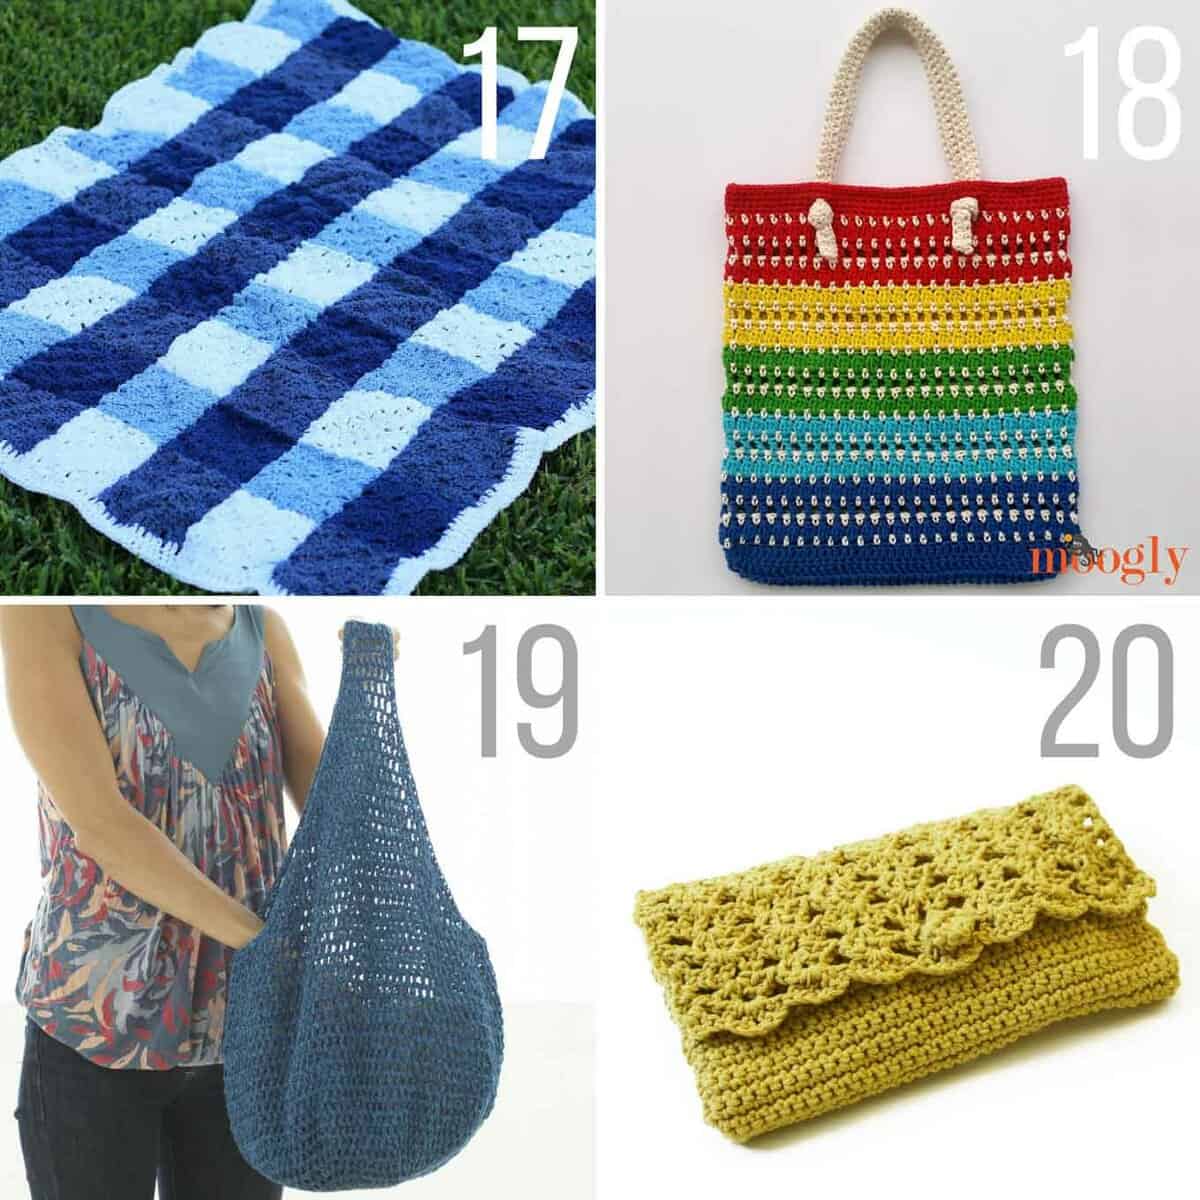 No crochet hibernation! This collection of popular spring and summer crochet patterns using Lion Brand yarn will give you plenty of ways to stay busy during the warmer months--and best of all, they're all free! So many cute crochet purse patterns!